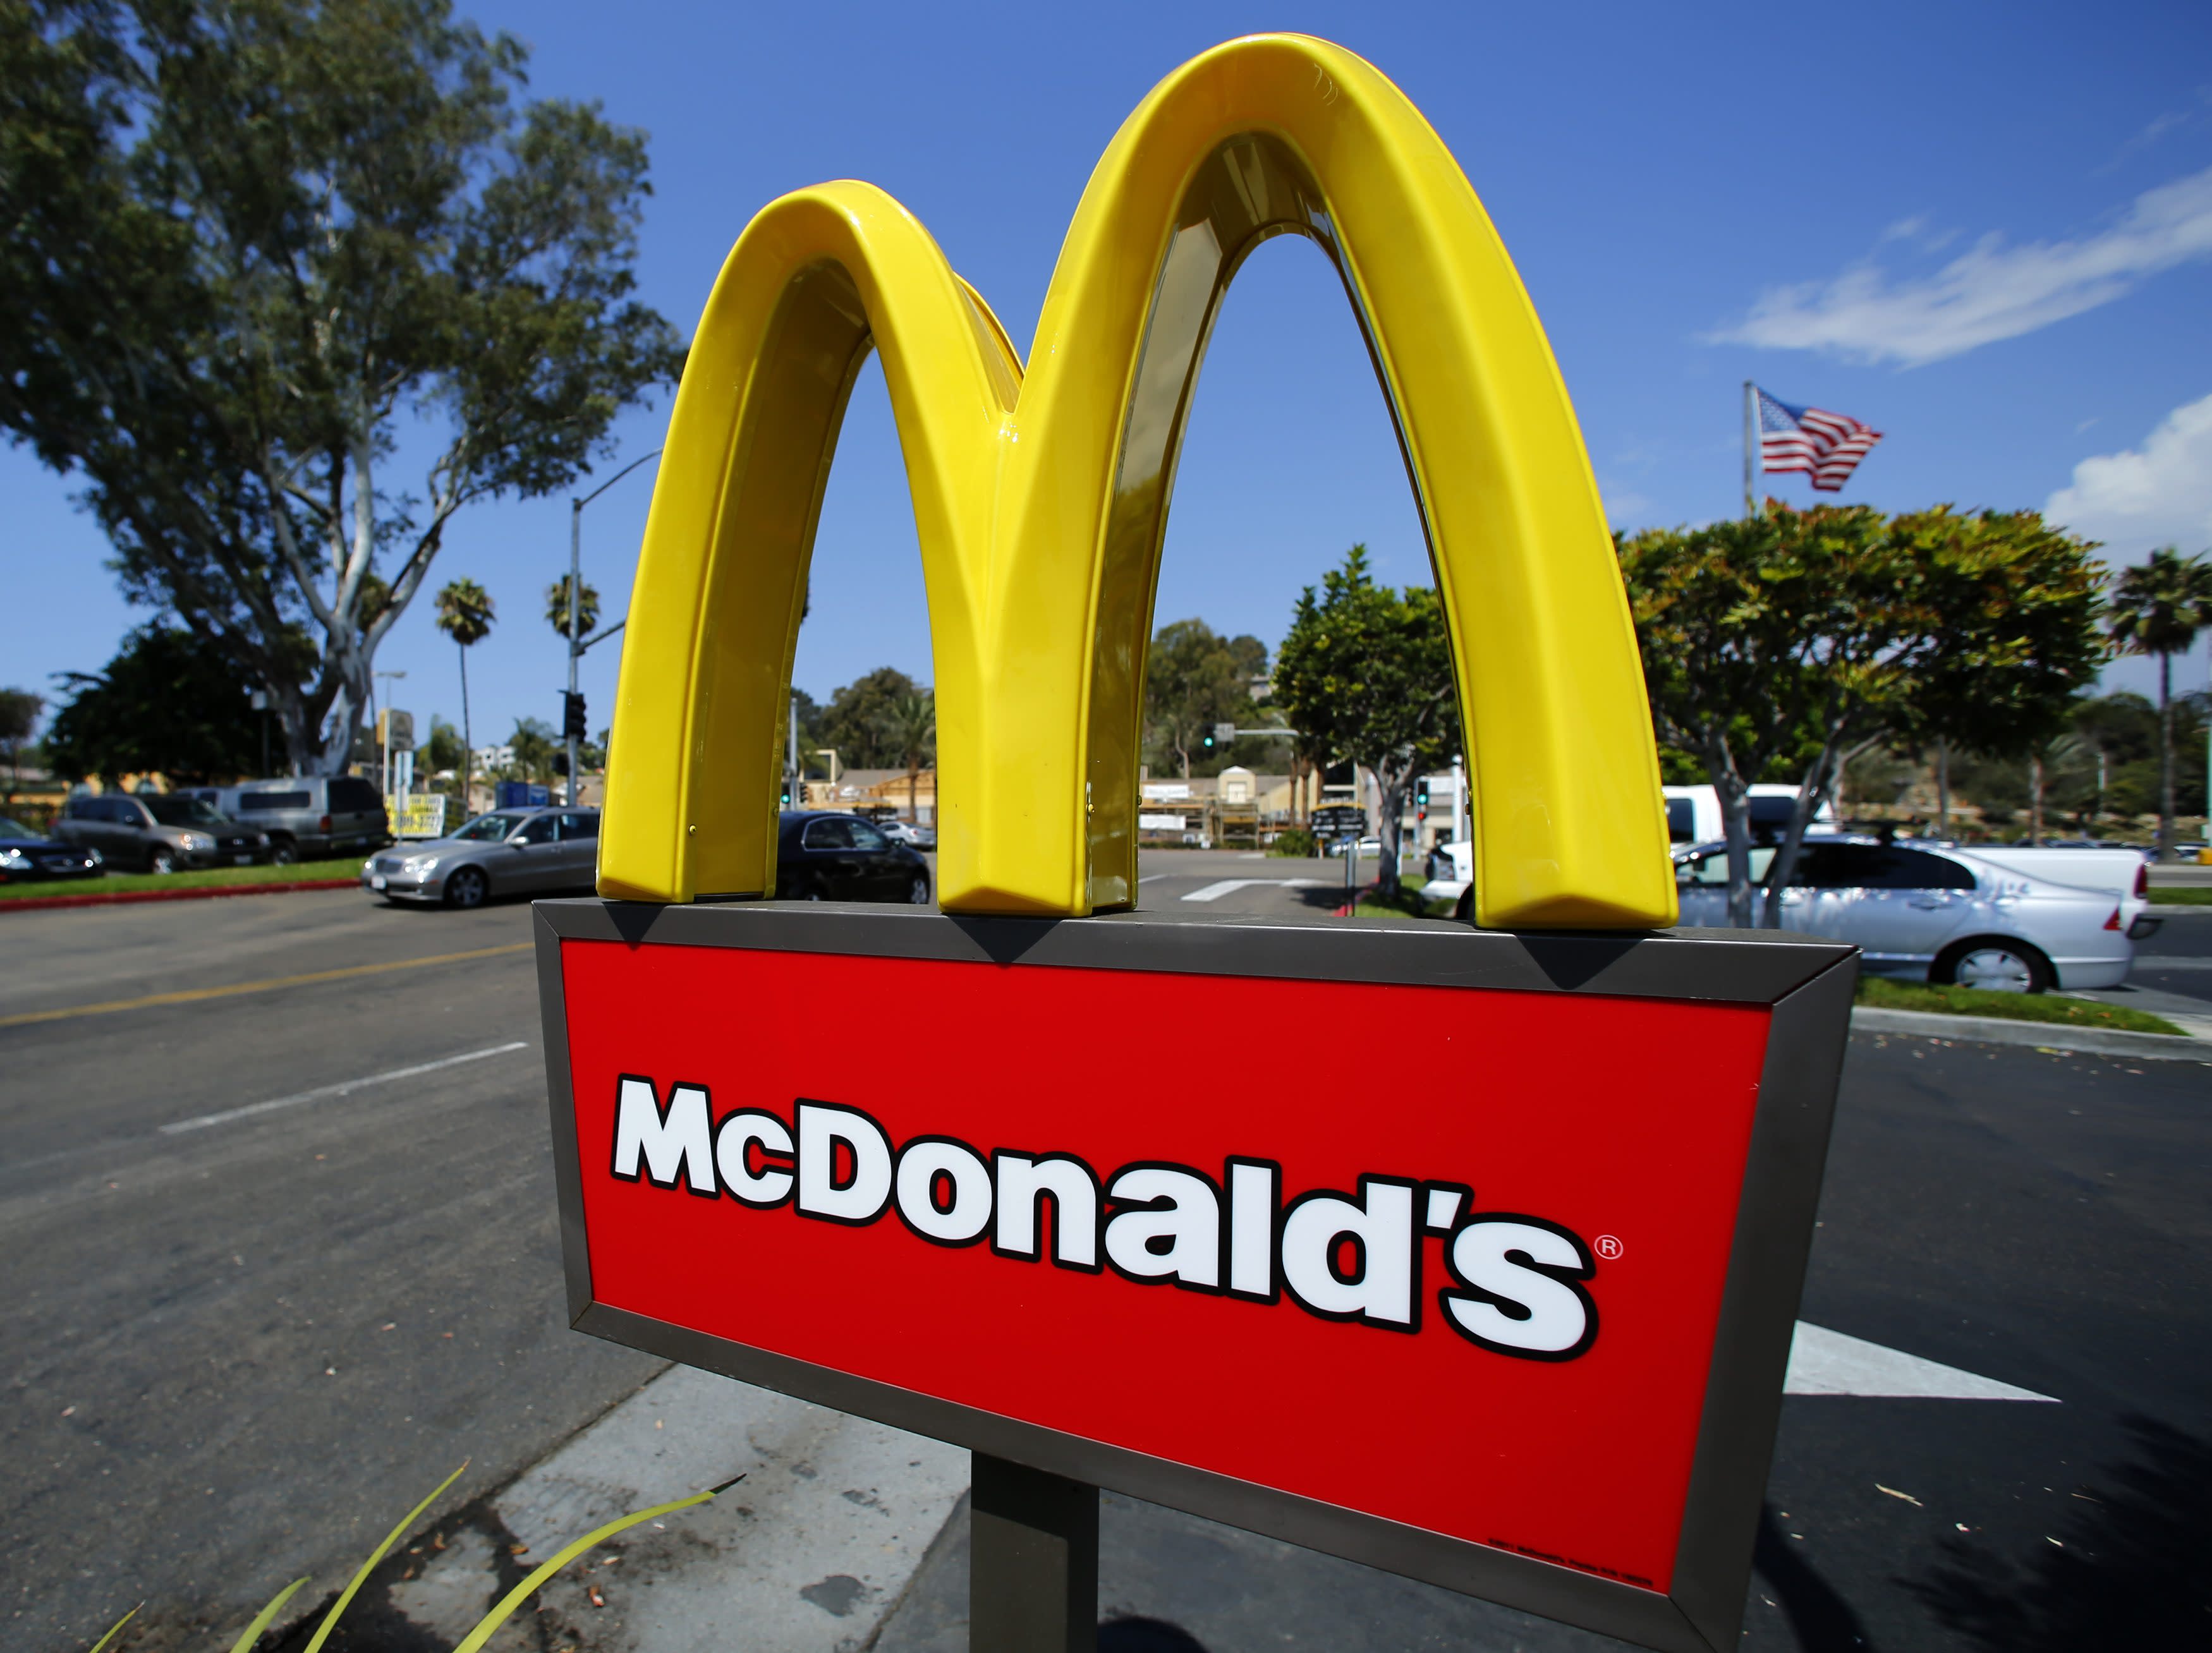 The top 10 global fast food chains